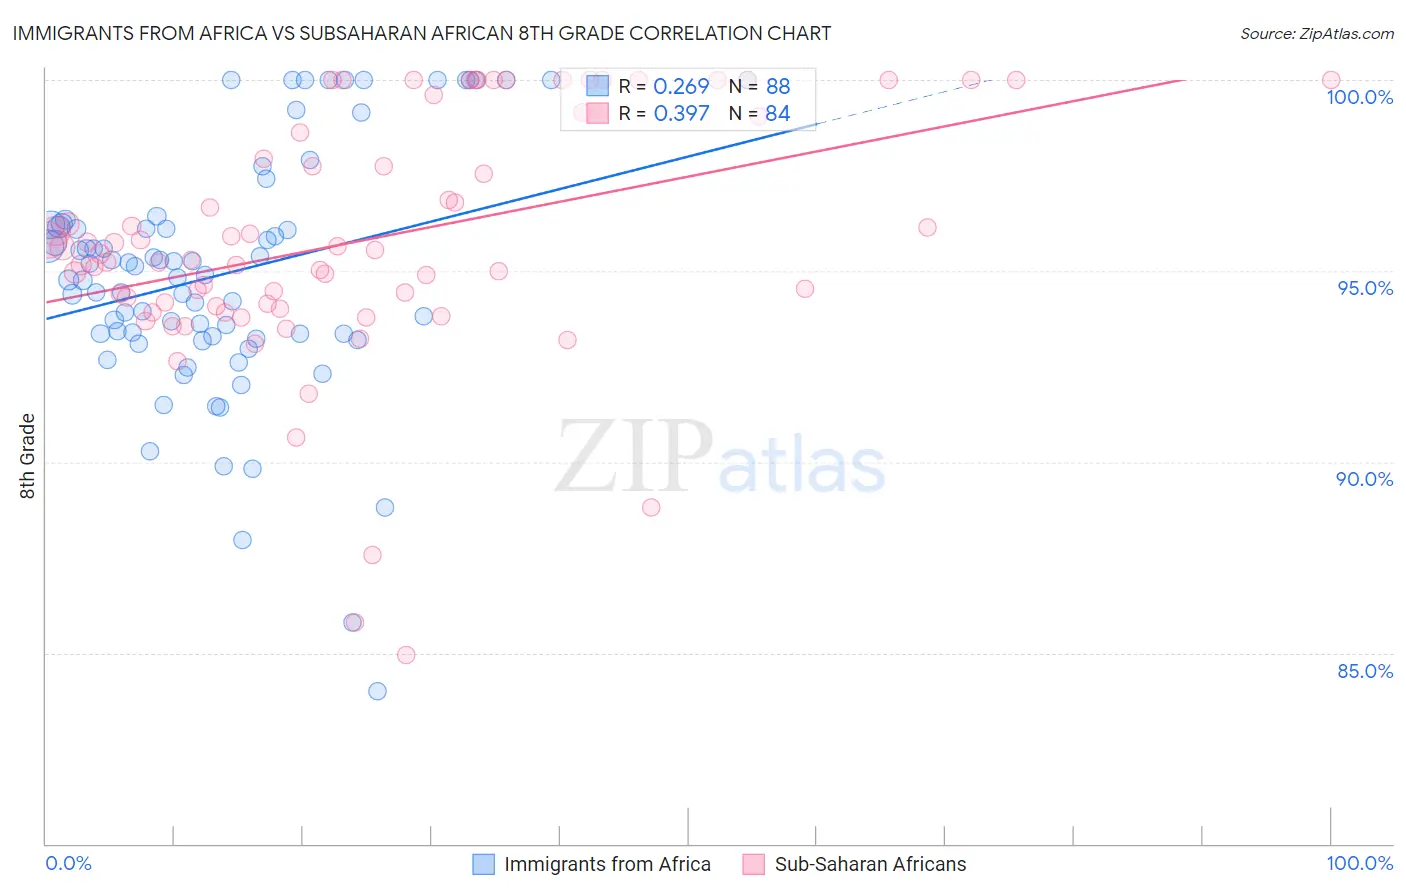 Immigrants from Africa vs Subsaharan African 8th Grade